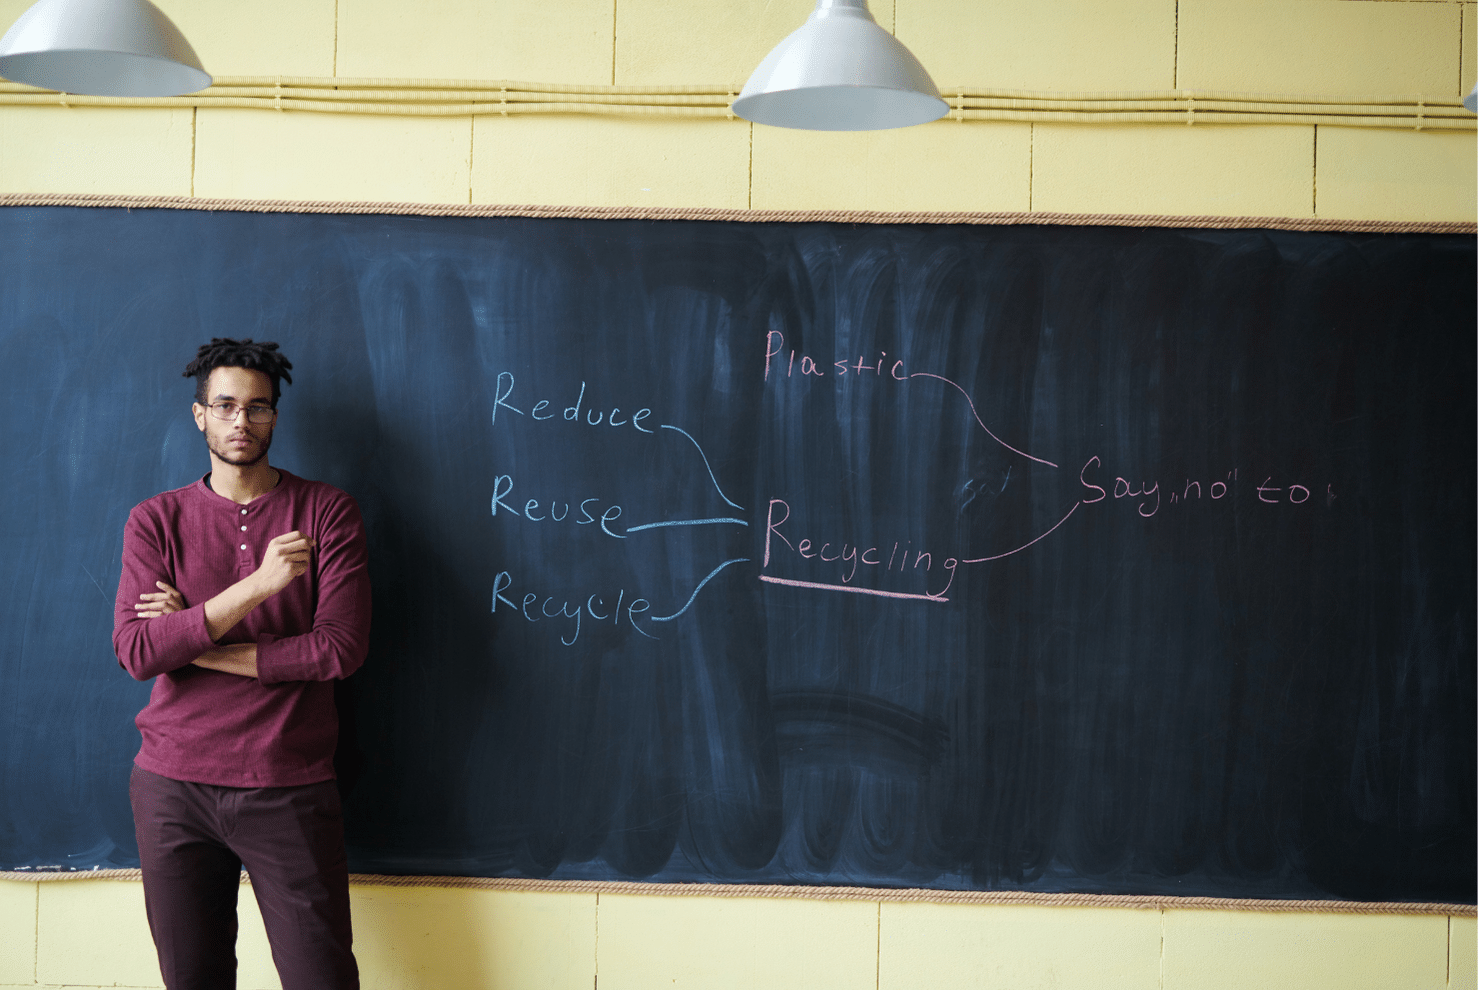 A man facing the camera stands in front of a chalkboard that contains a handwritten cloud diagram with the words "reduce, reuse, recycle" connected to "recycling, plastic" and the phrase "say 'no' to".